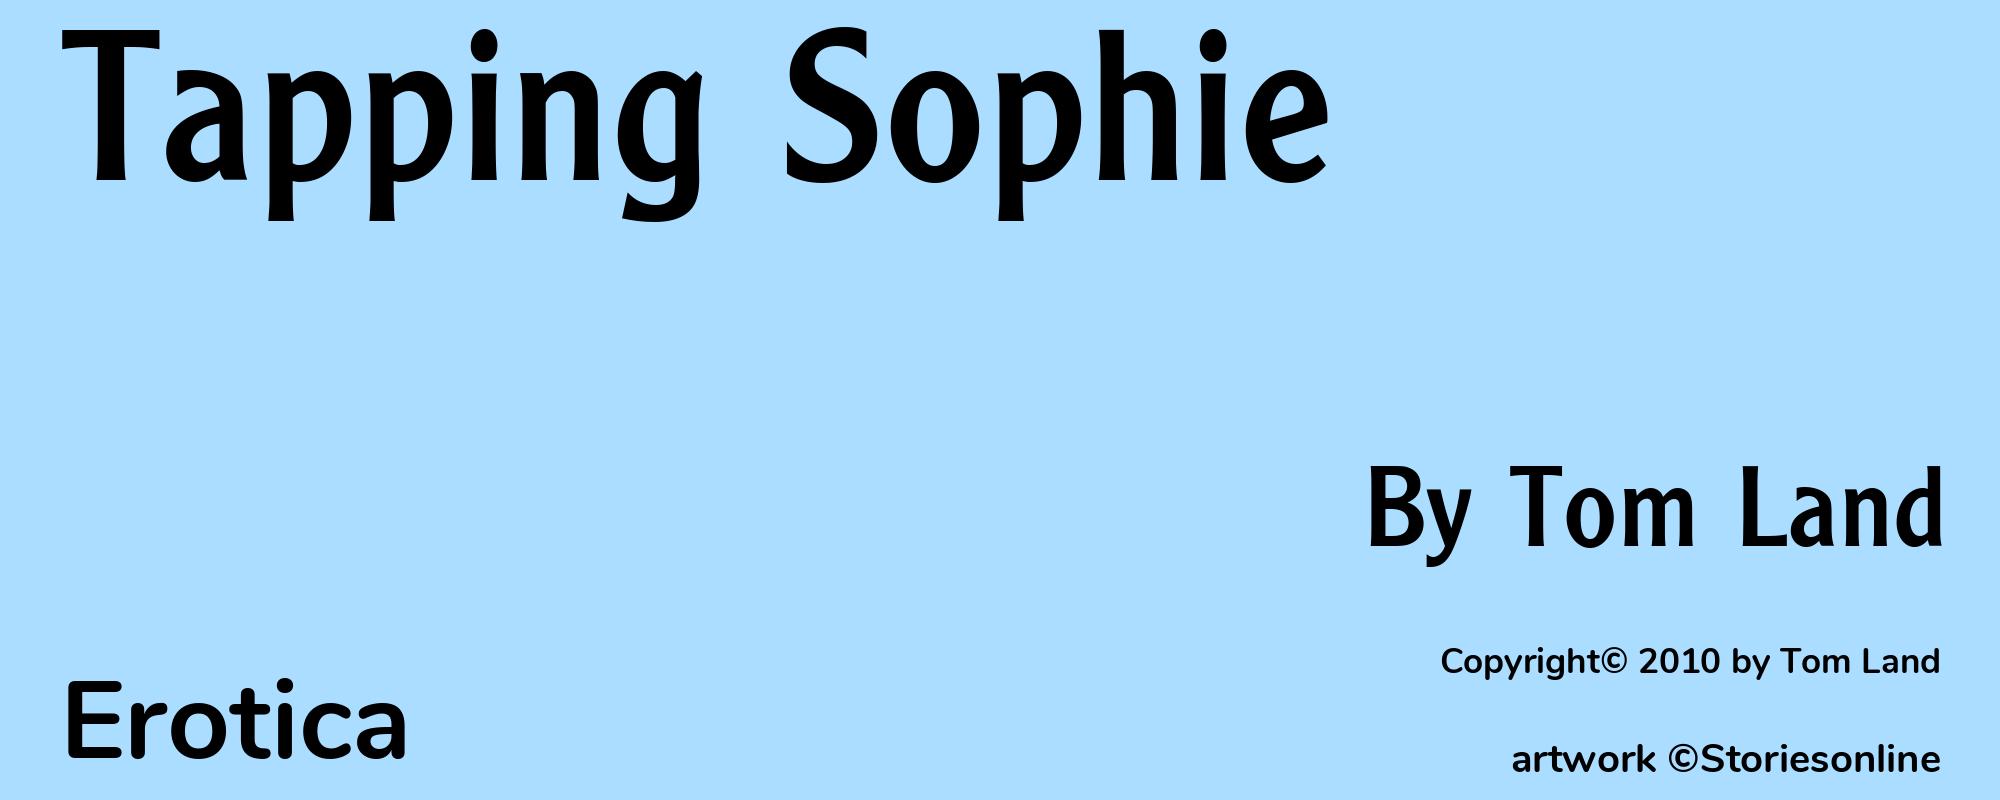 Tapping Sophie - Cover